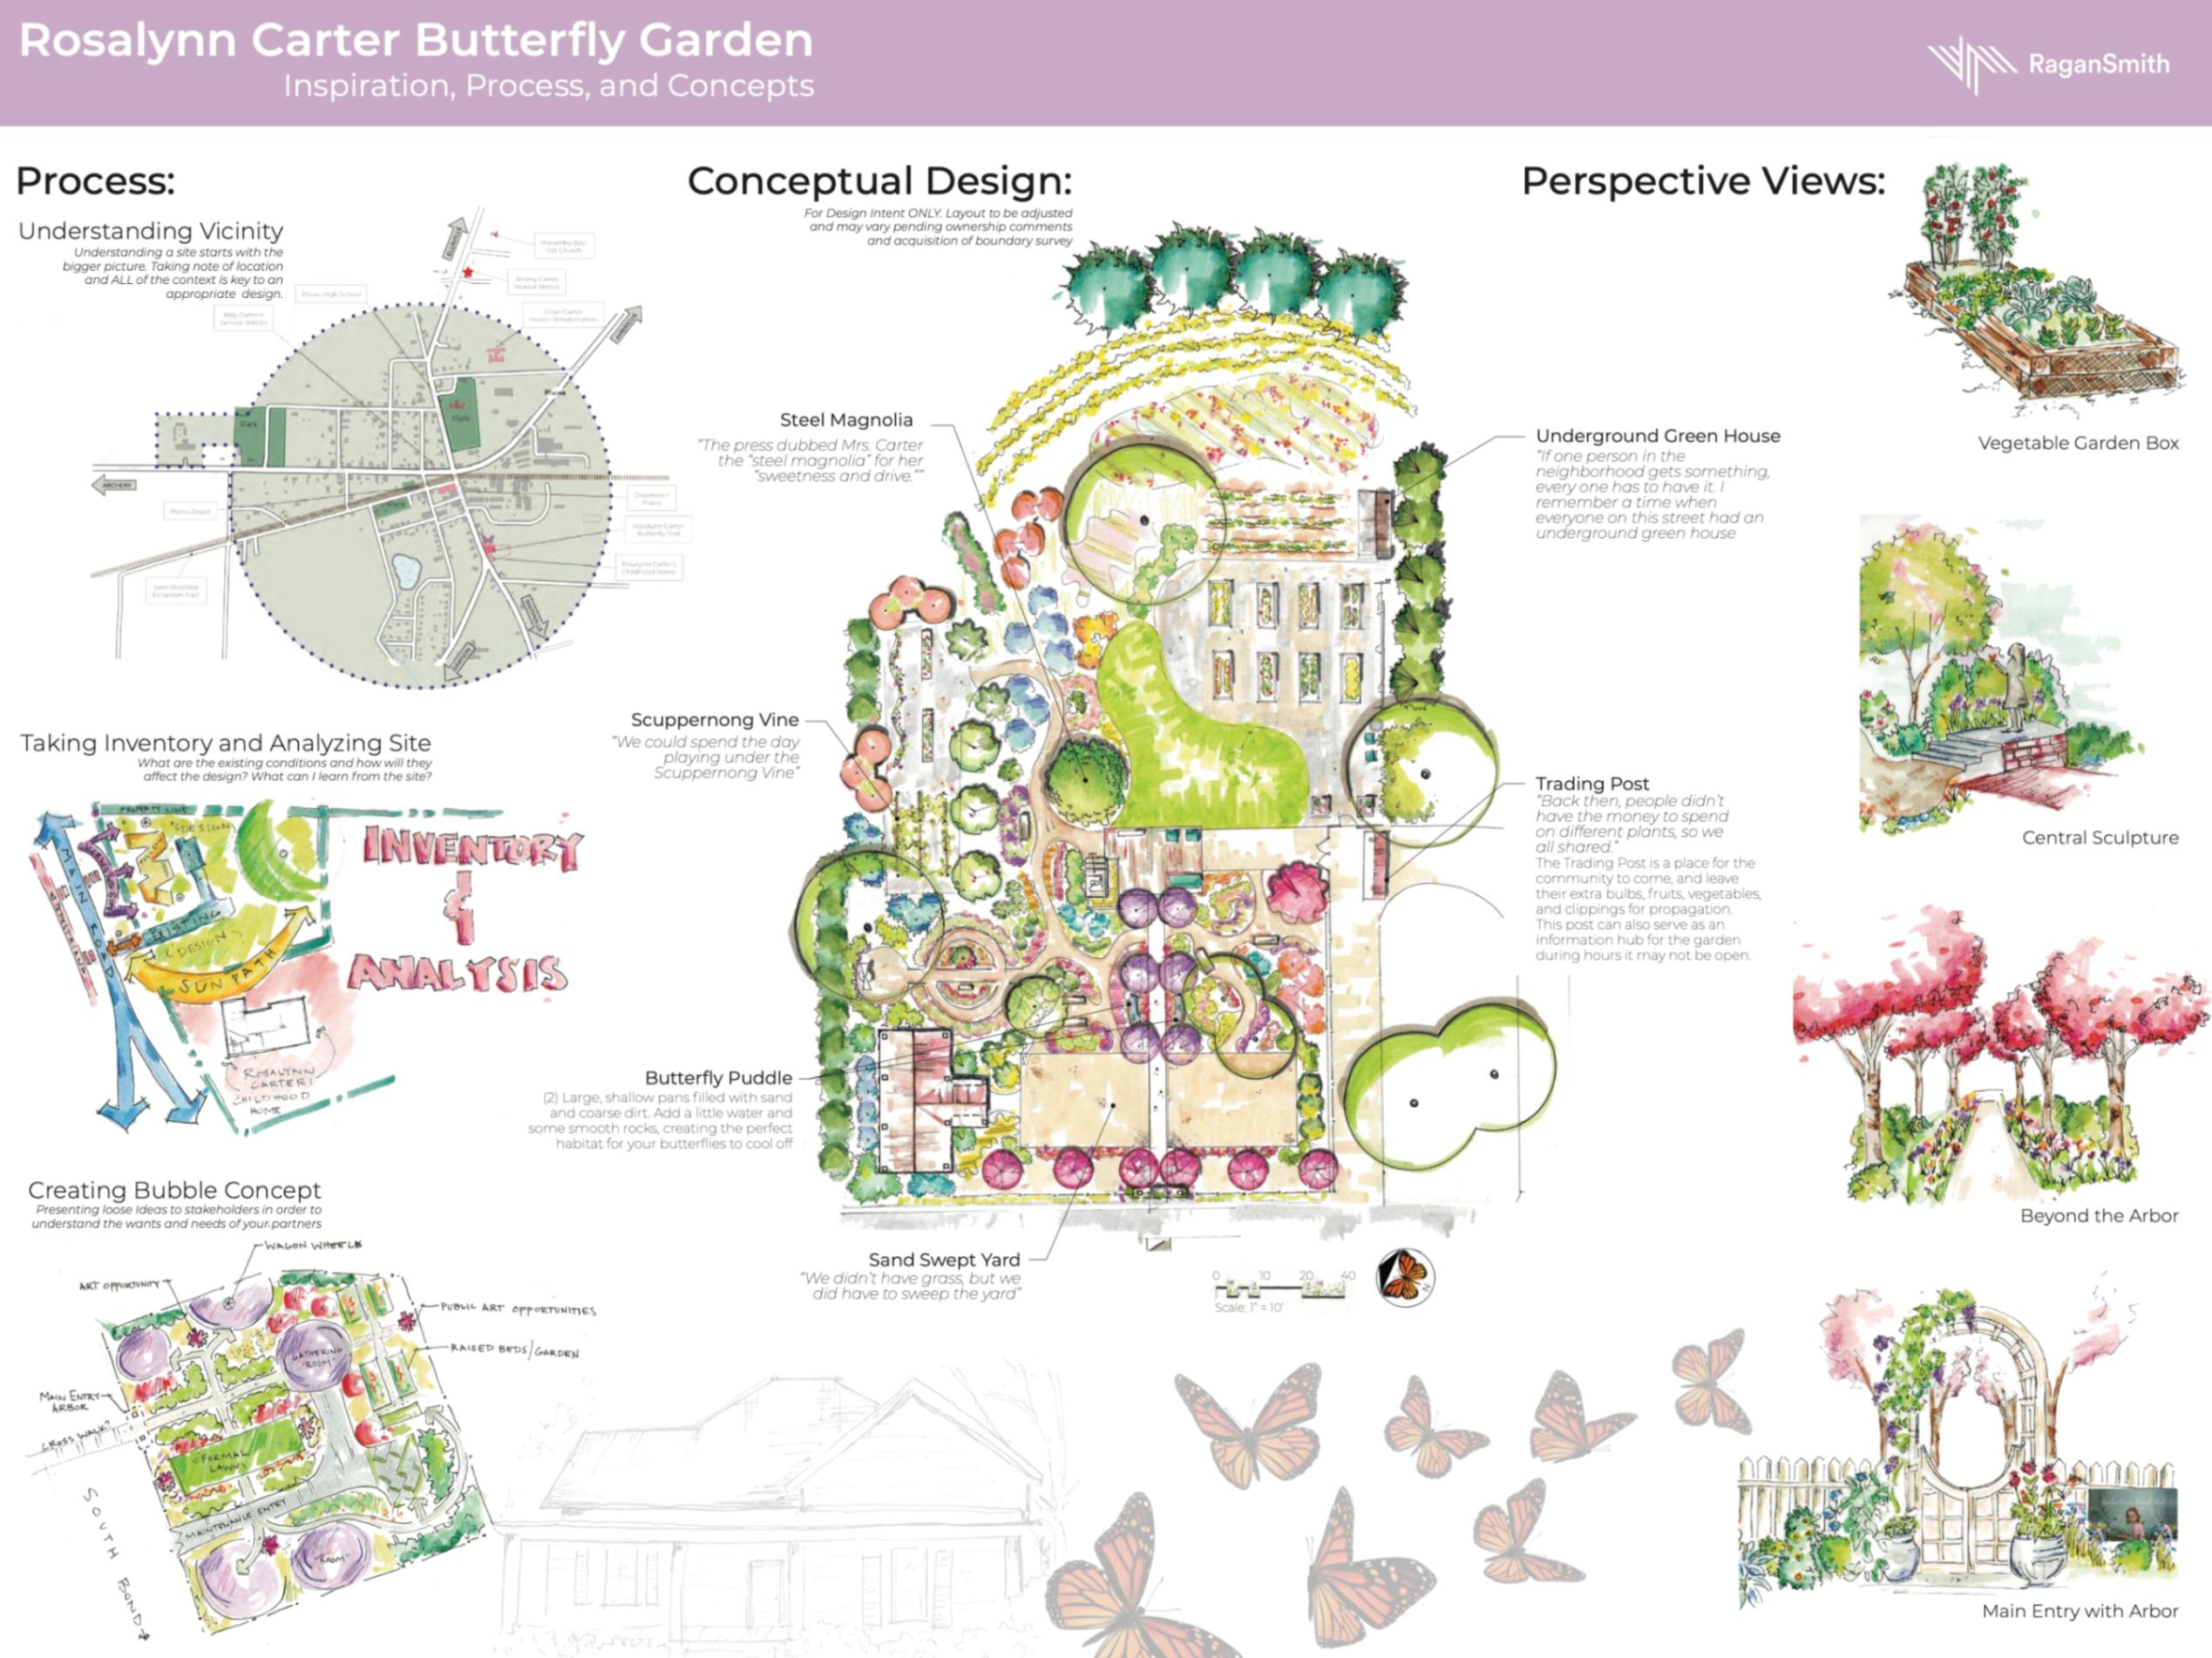 This image displays Grace's design plans for the Rosalynn Carter Butterfly Trail Organization.  